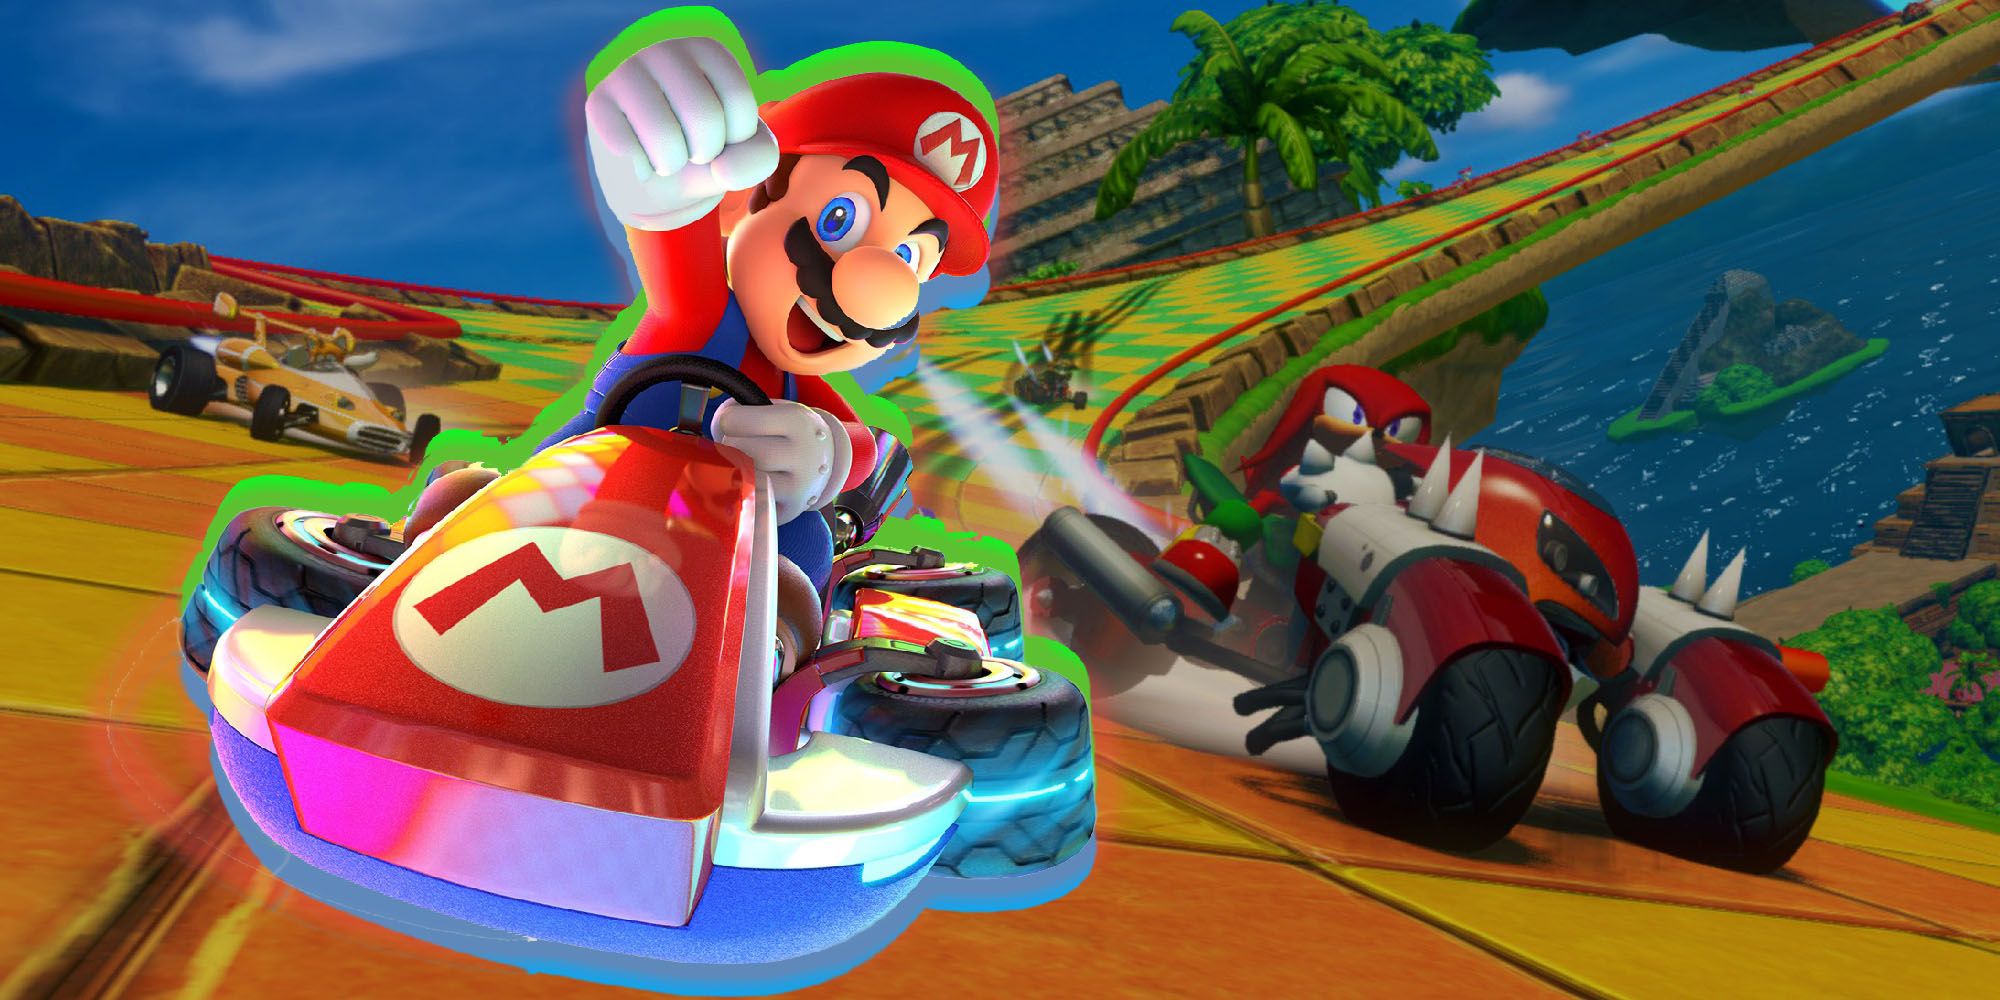 Mario Kart could learn from Sonic & All-Stars Racing Transformed